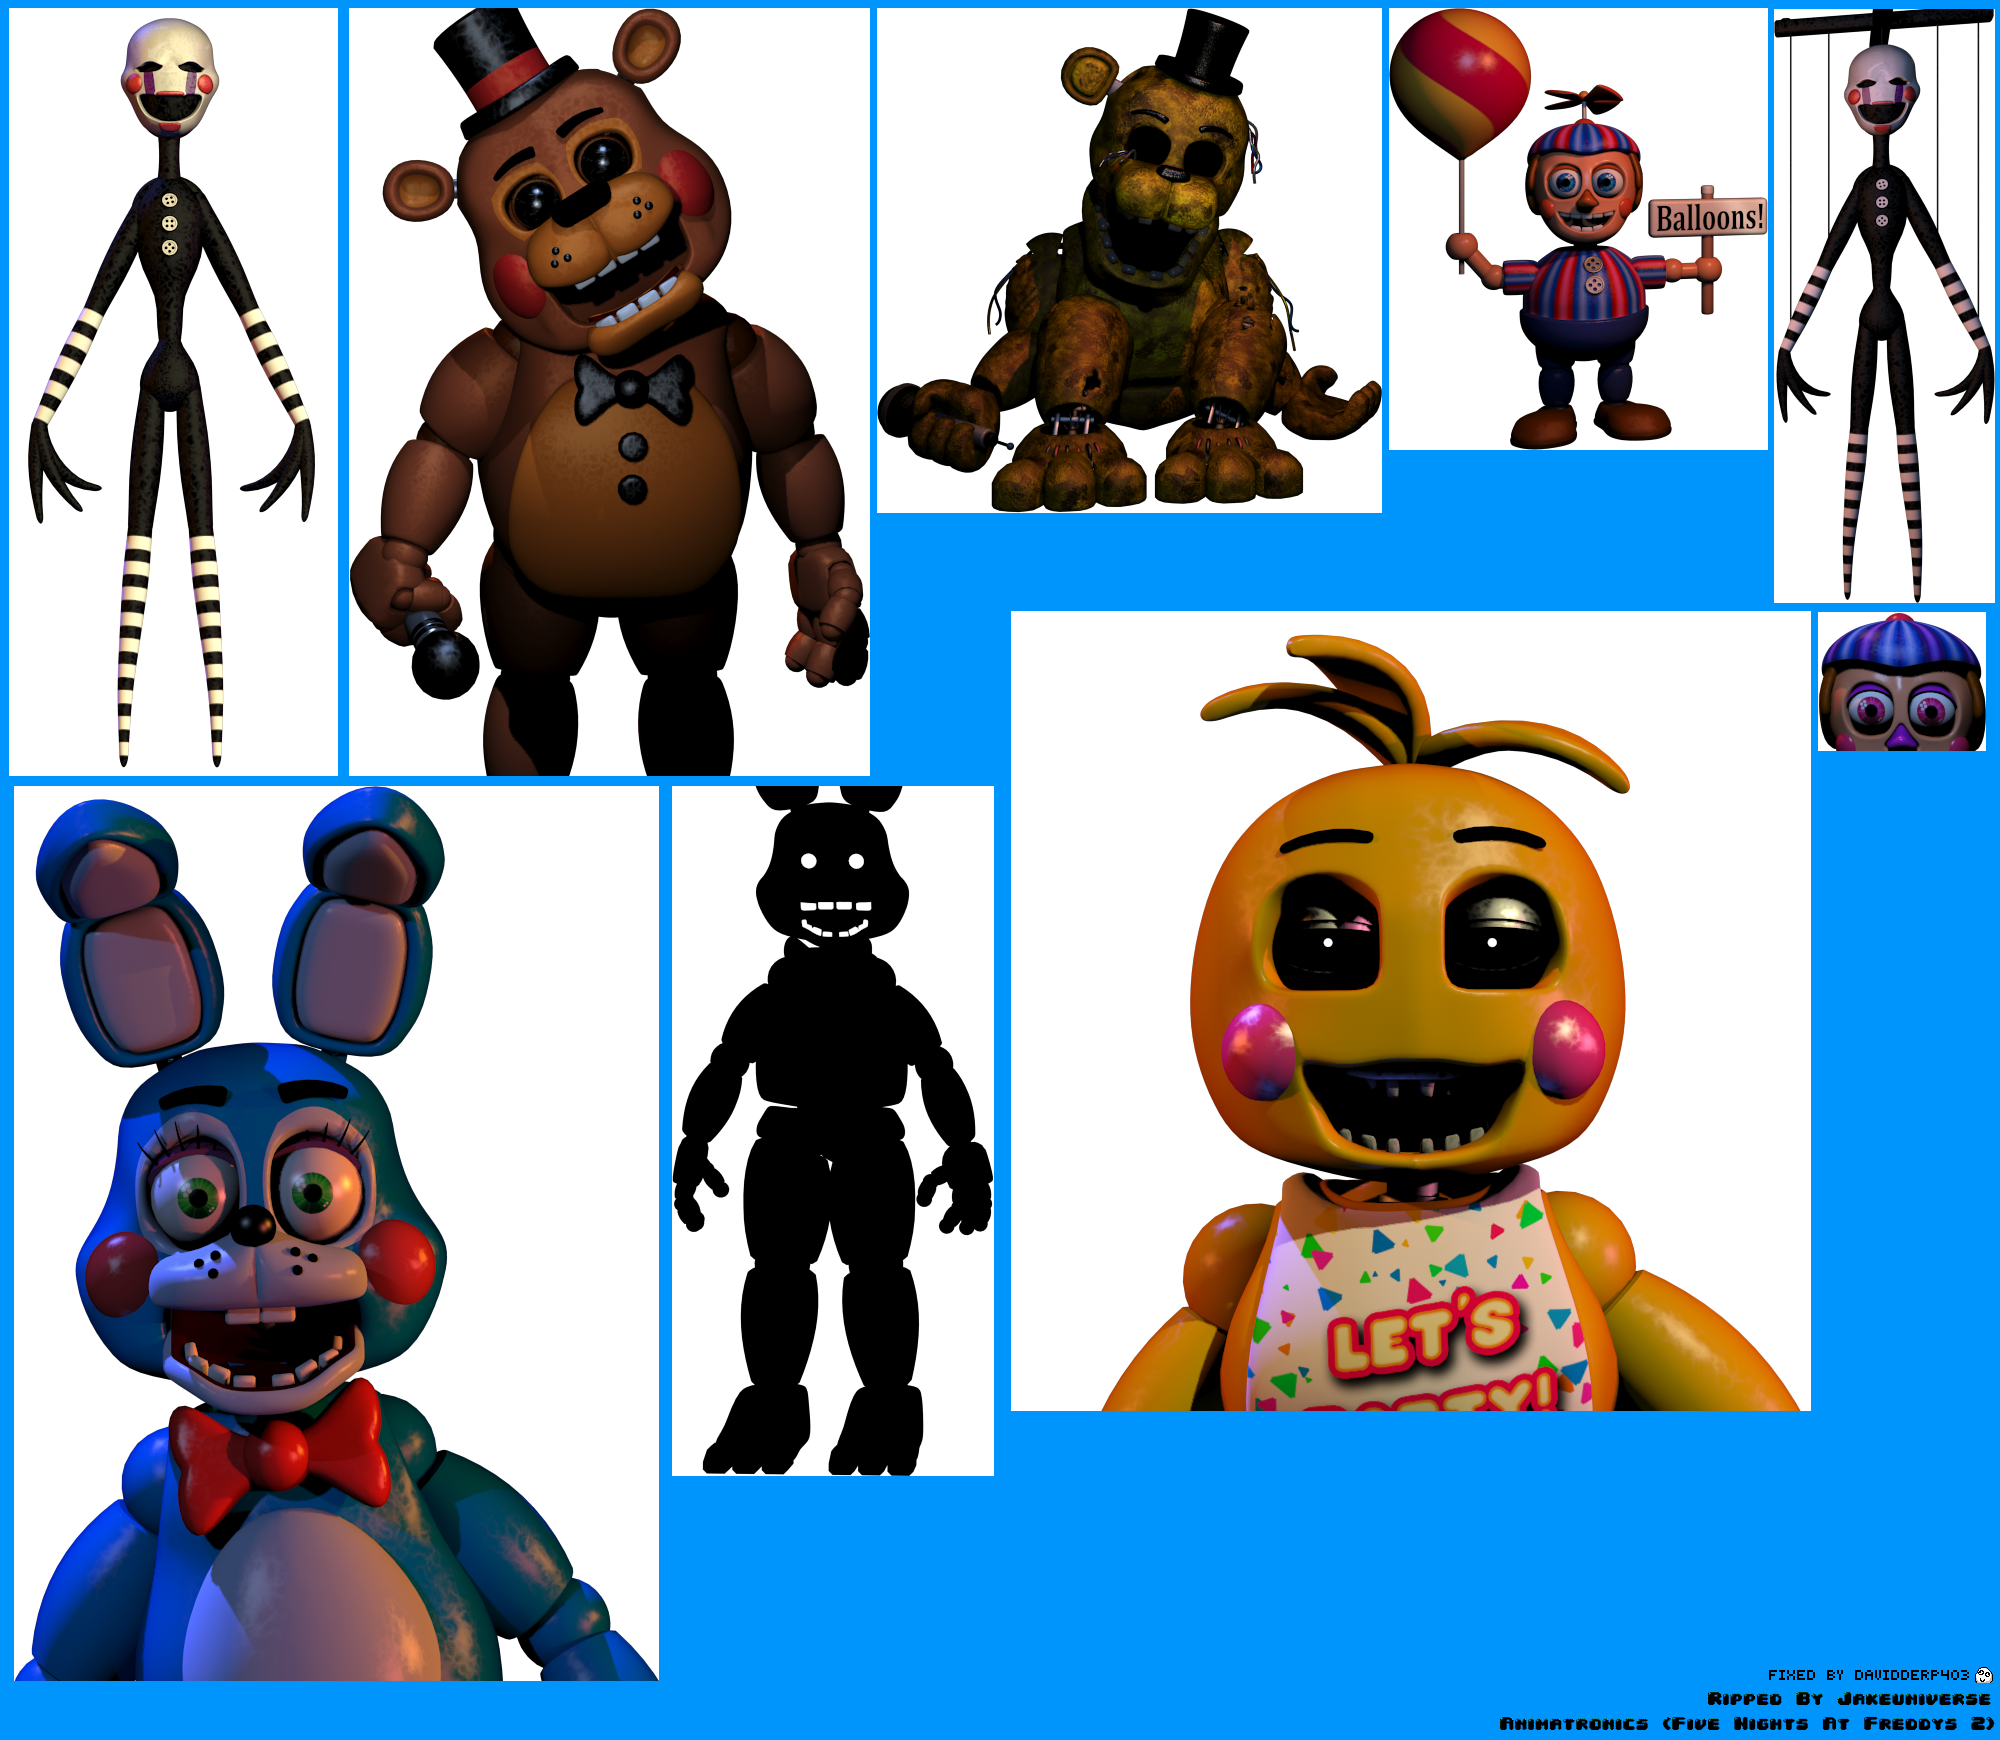 Five Nights at Freddy's 2 - Other Animatronics